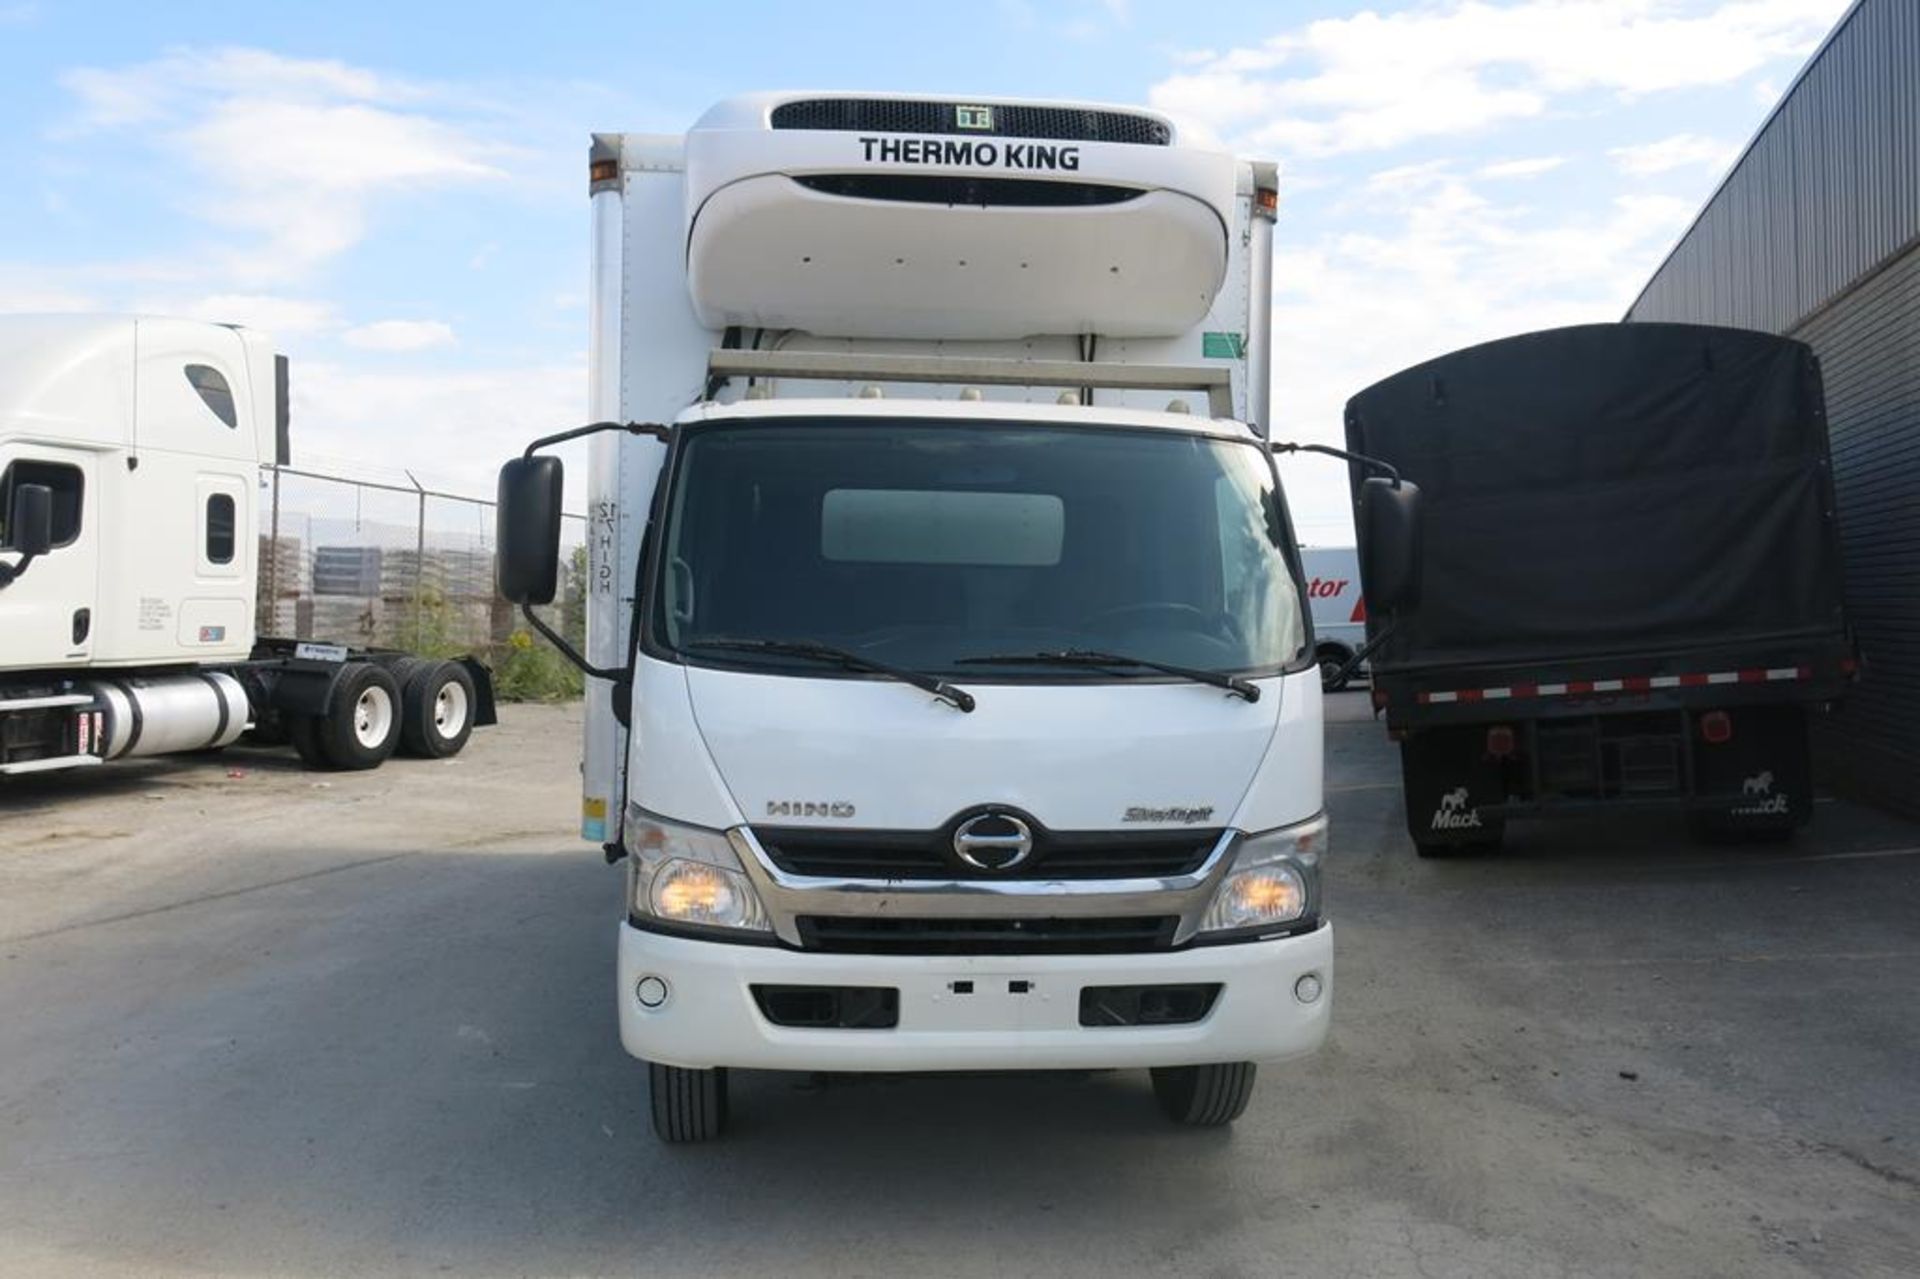 2013, HINO, 195, REEFER TRUCK, MULTIVANS, 18', INSULATED BOX, THERMOKING, T800 WHISPER, REEFER, - Image 2 of 32